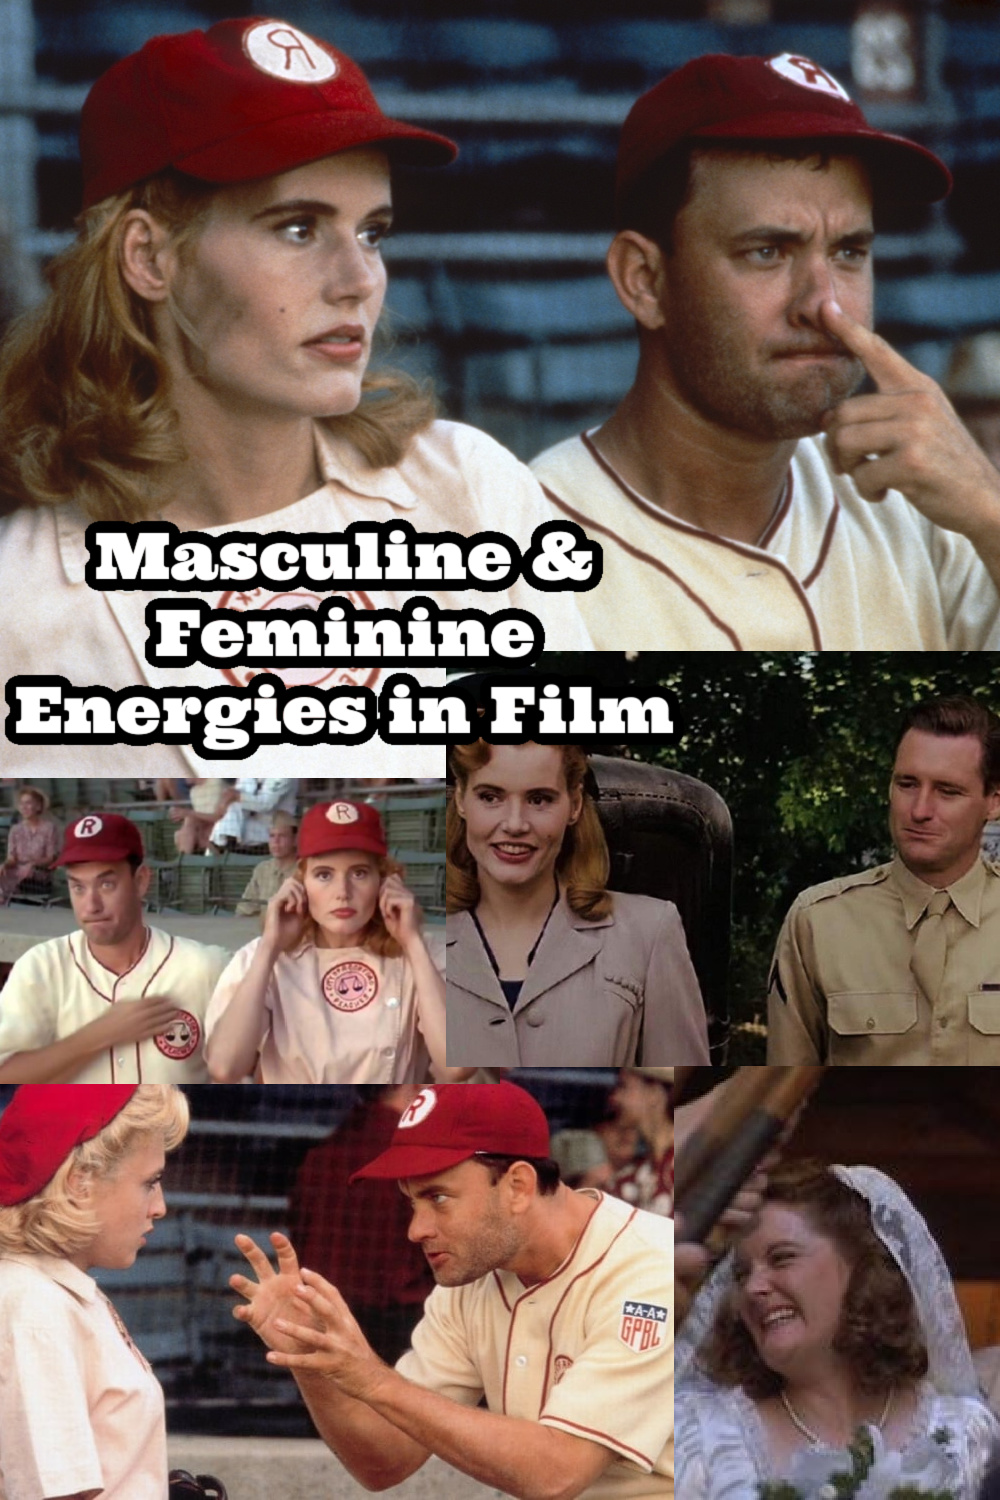 a league of their own breakdown, wounded femininity in men, femininity in relationships, wounded feminine energy traits, wounded feminine and masculine, wounded feminine energy in a man, feminine movie character breakdown, feminine film, femininity in film, masculine and feminine examples, feminine films, femininity in movies, understanding masculine and feminine energy, understanding masculine and feminine energy beginners guide, feminine and masculine energy in relationships, difference between feminine and masculine energy, divine masculine and feminine healing energy, feminine energy, feminine and masculine energy balance, feminine and masculine energy traits, feminine masculine energy, feminine energy vs masculine energy, masculine energy, masculine energy vs feminine energy, masculine vs feminine, Everyday starlet, sarah blodgett,